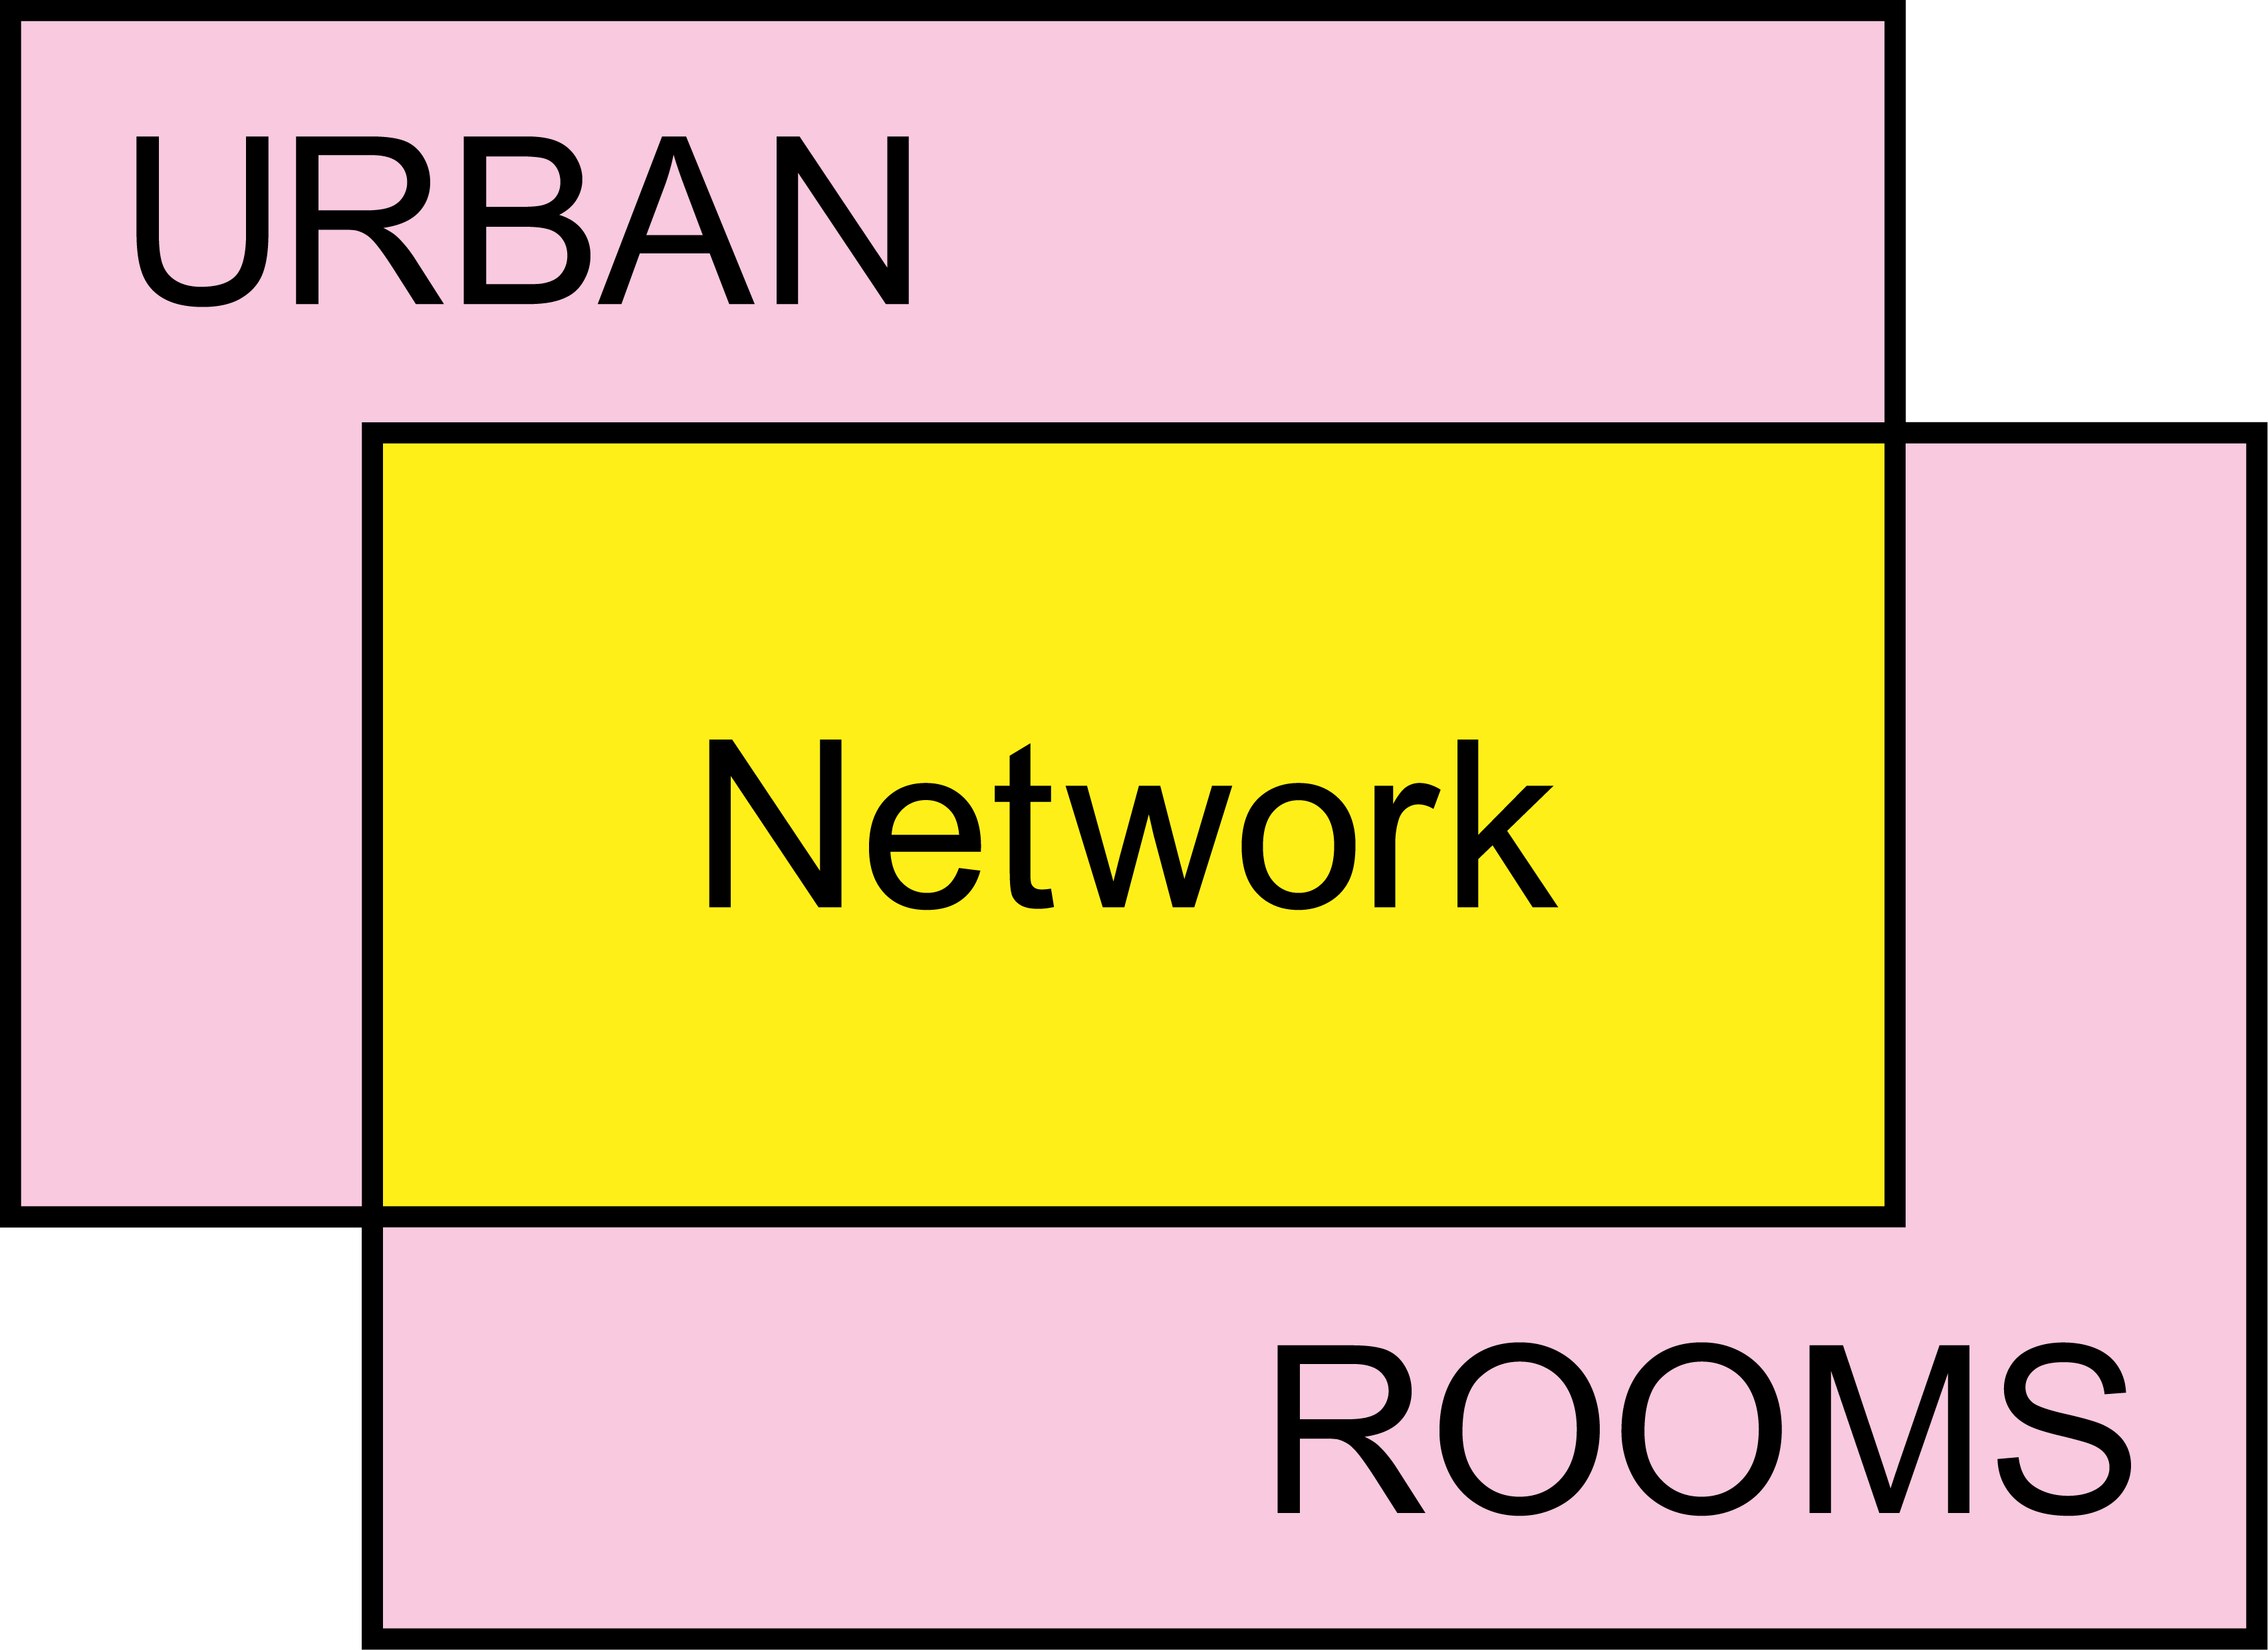 URBAN ROOMS NETWORK